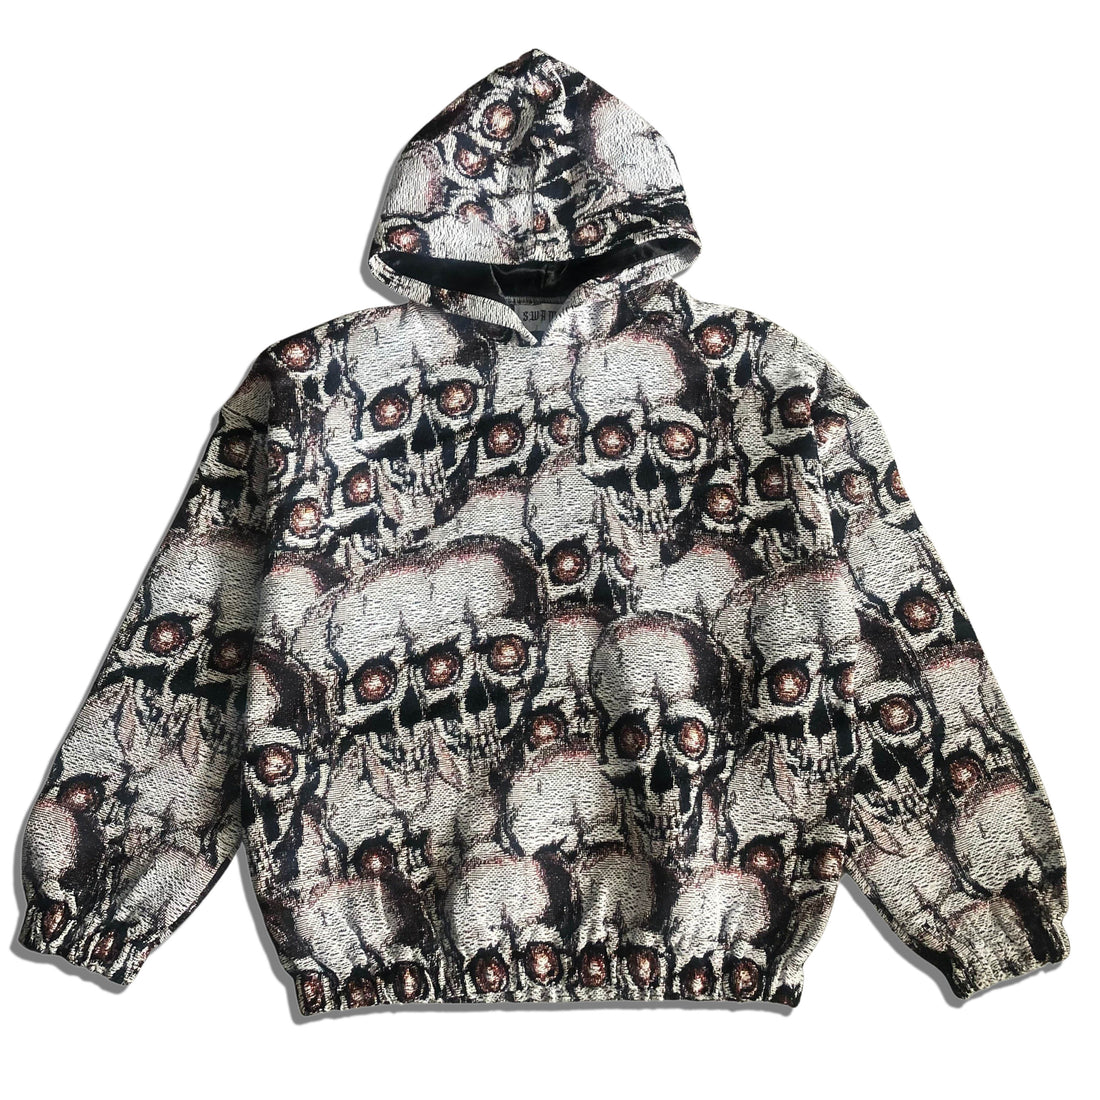 'Death Waits For No Man' Hoodie